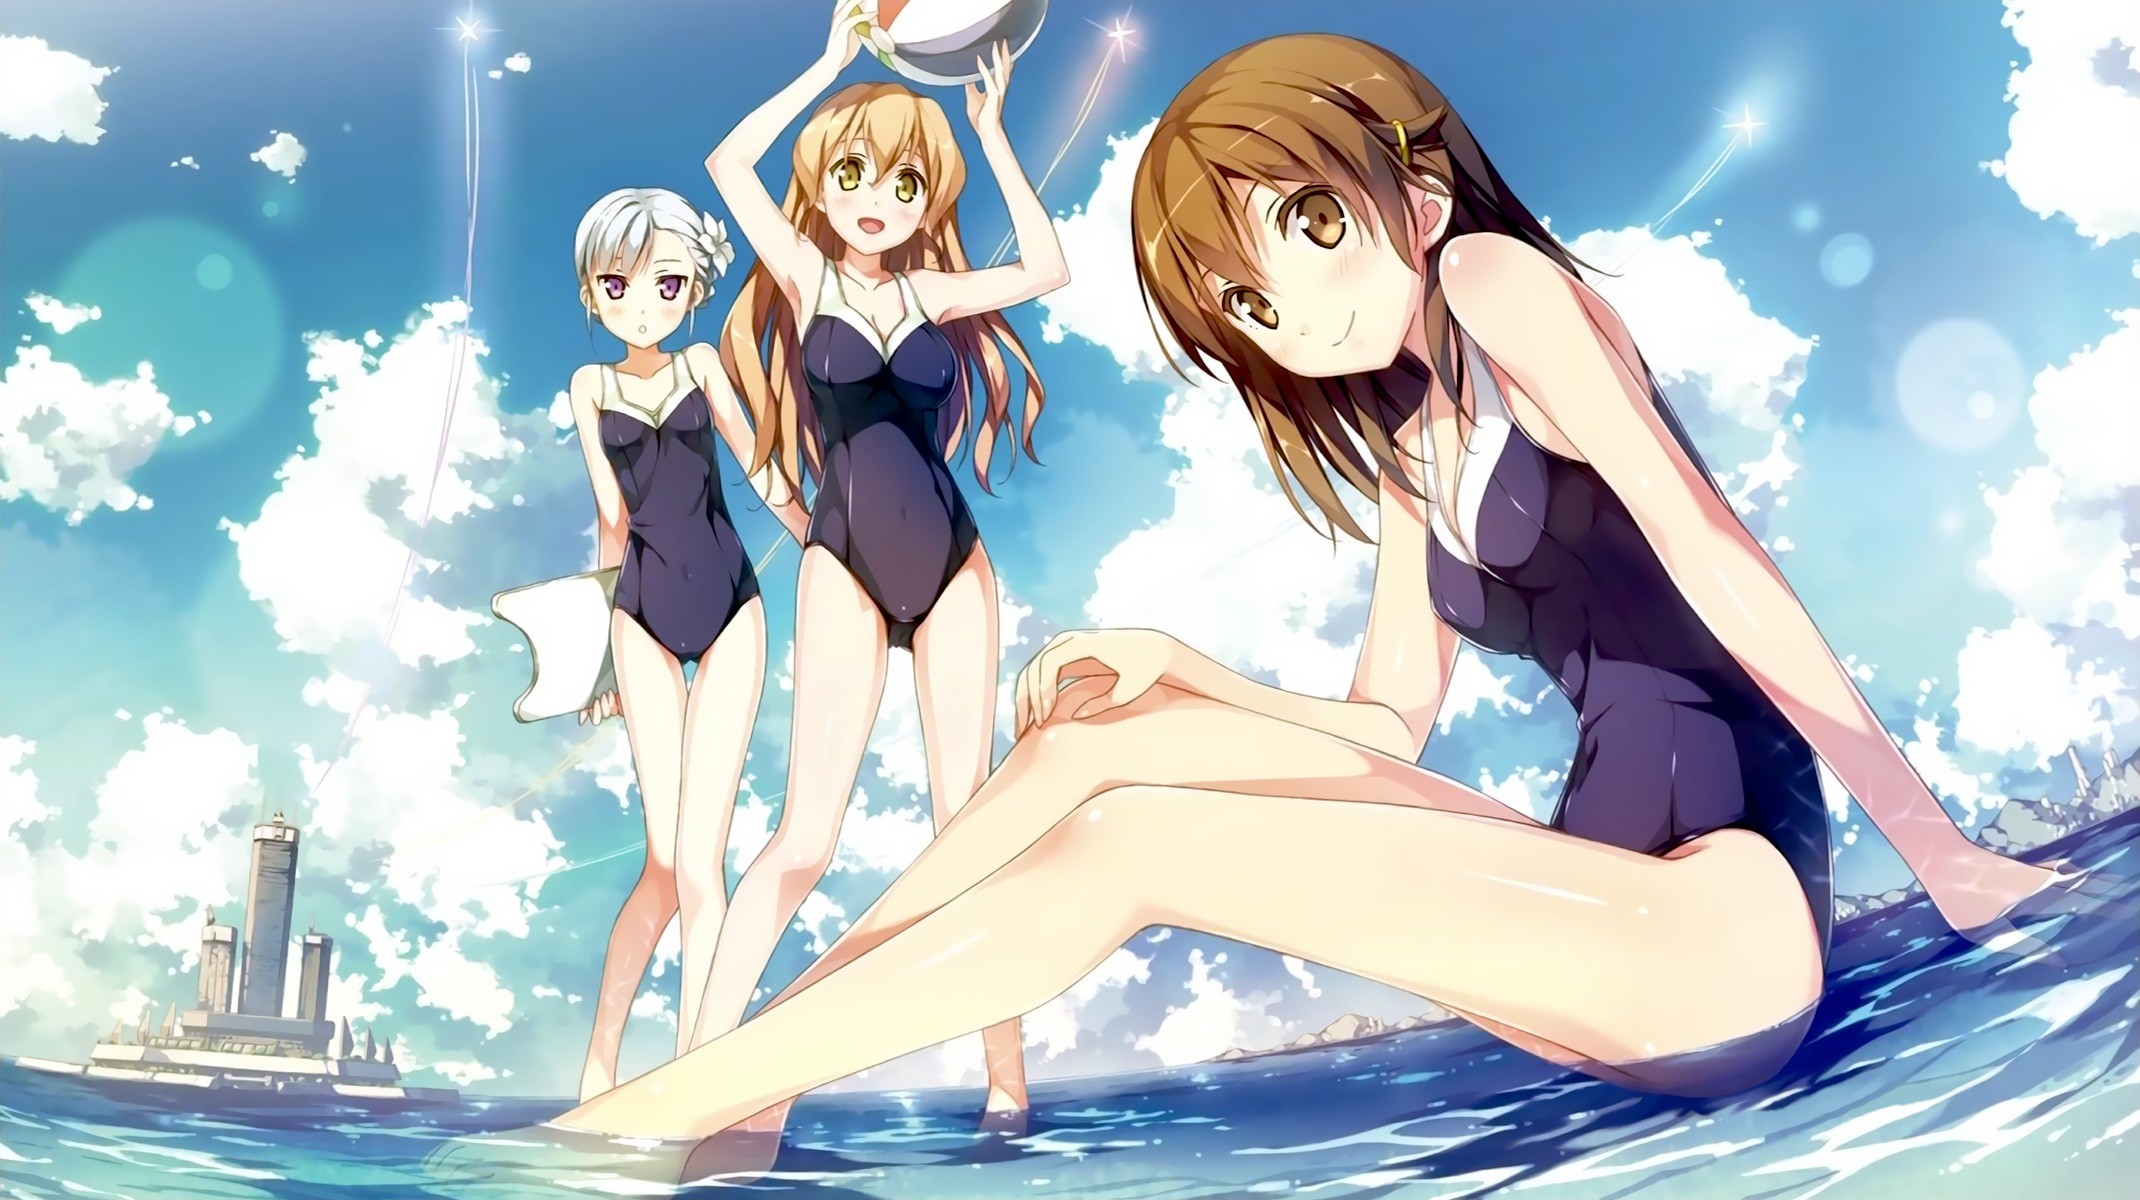 Anime 2140x1200 anime anime girls Rinne no Lagrange Fin E Ld Si Laffinty Kyouno Madoka ball blonde blue hair brunette building clouds long hair short hair sky water women trio women one-piece swimsuit swimwear smiling sitting standing arms up looking at viewer